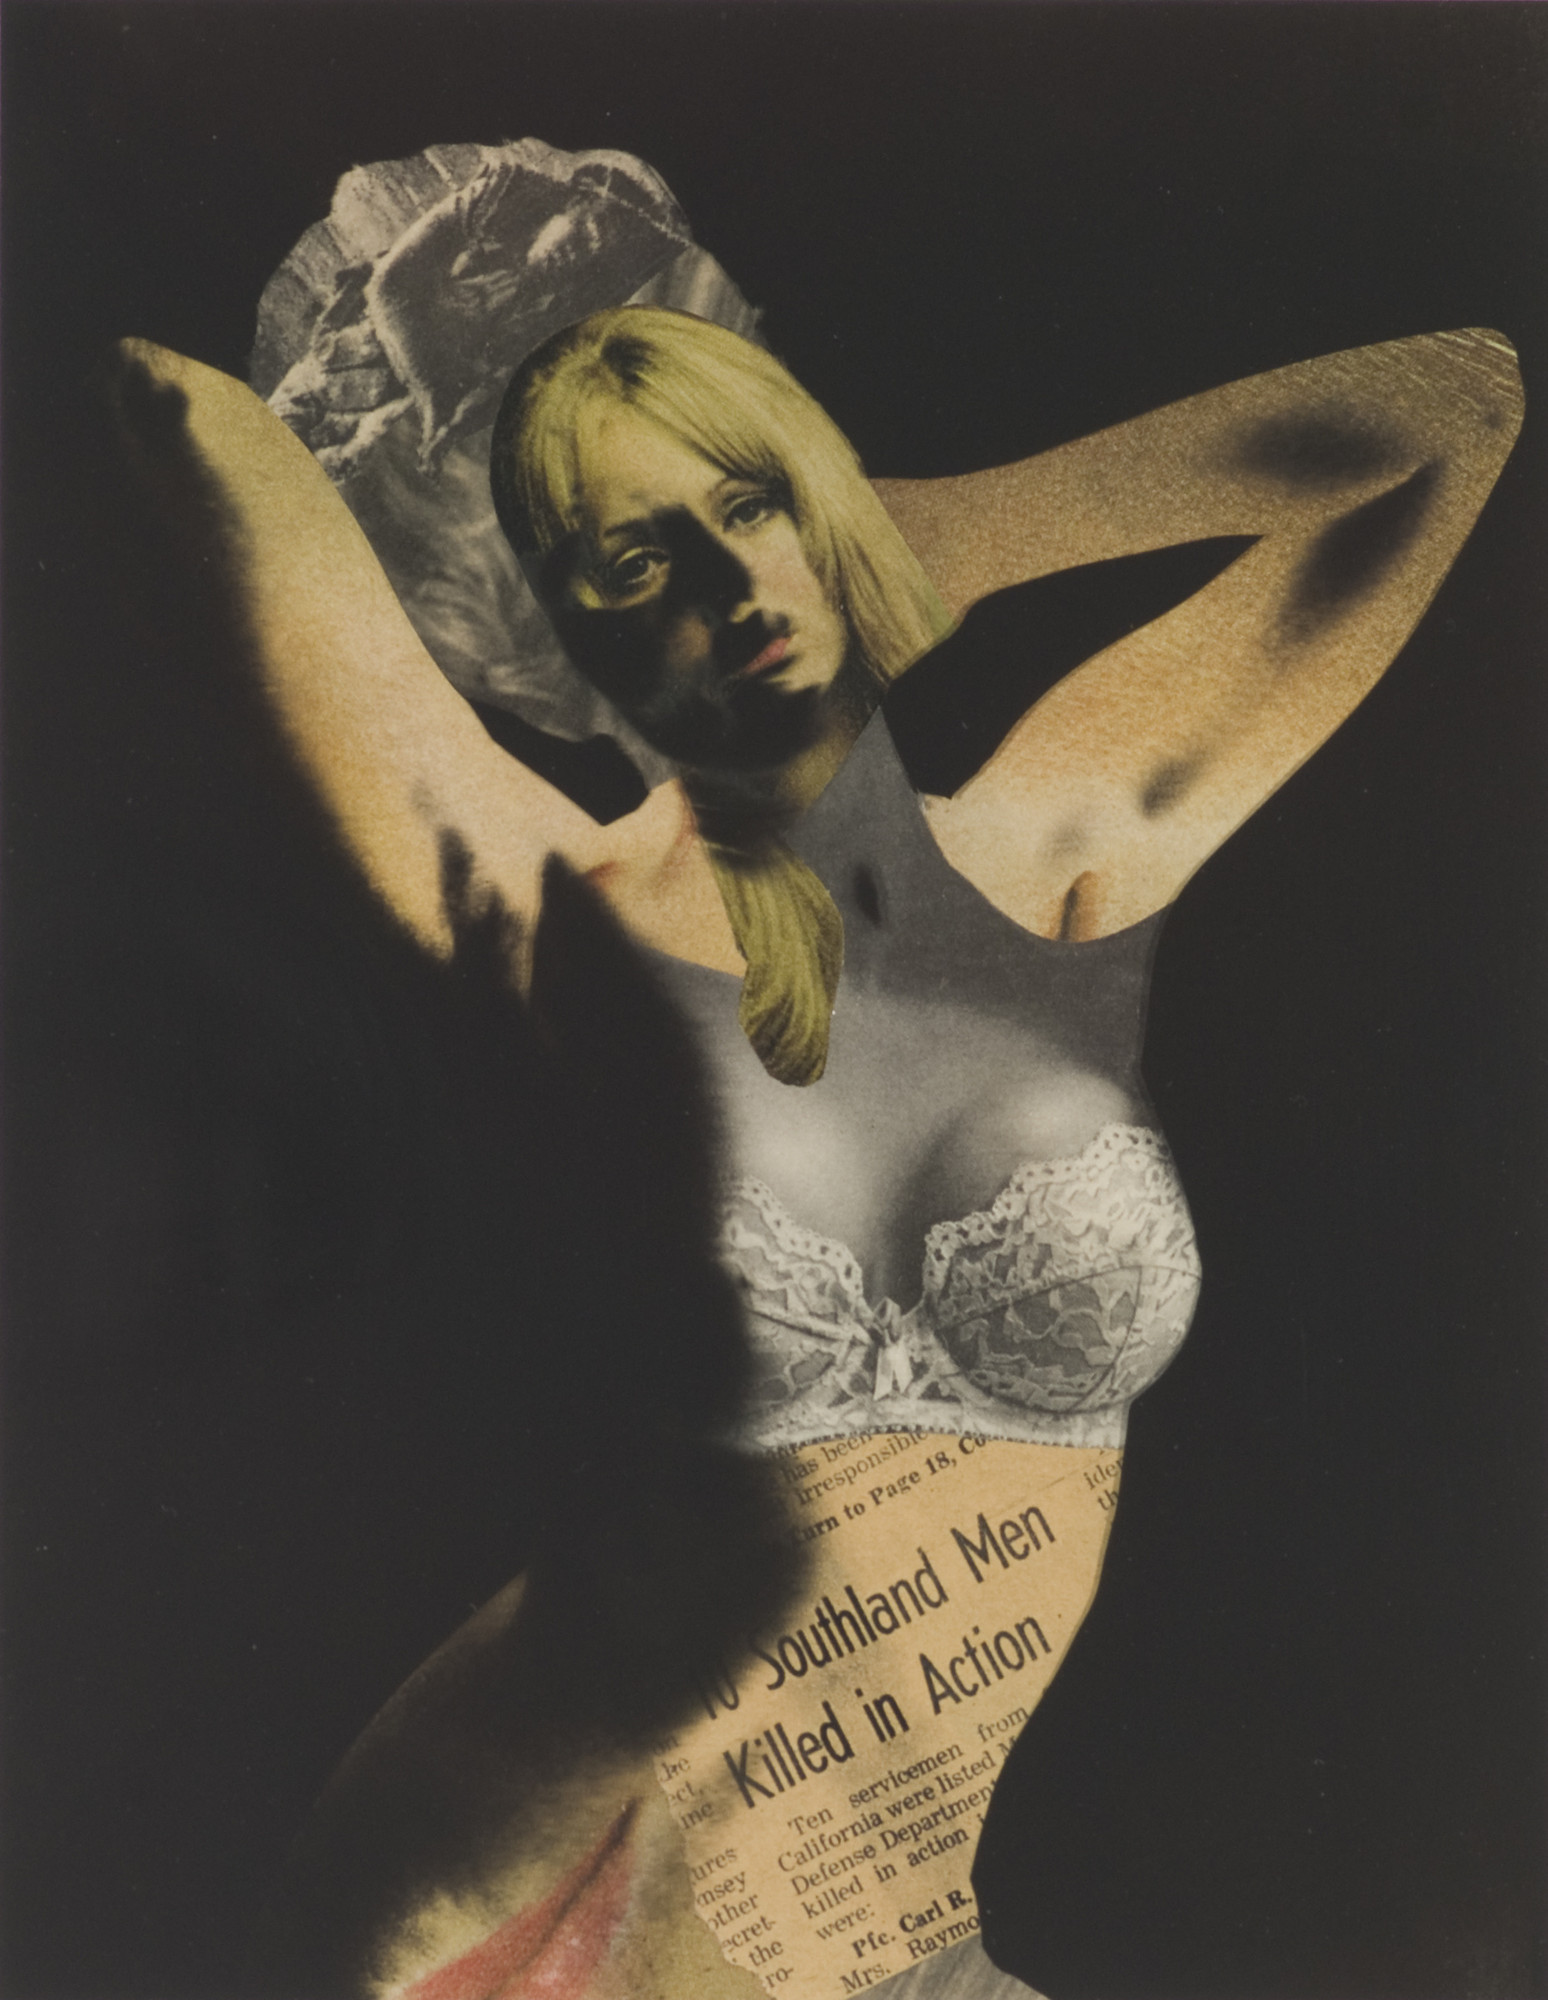 Robert Heinecken. _V.N. Pin Up_. 1968. Black-and-white film transparency over magazine-page collage, 9 × 7″ (22.9 × 17.8 cm). Museum of Contemporary Art, Chicago. Gift of Daryl Gerber Stokols. © 2014 The Robert Heinecken Trust